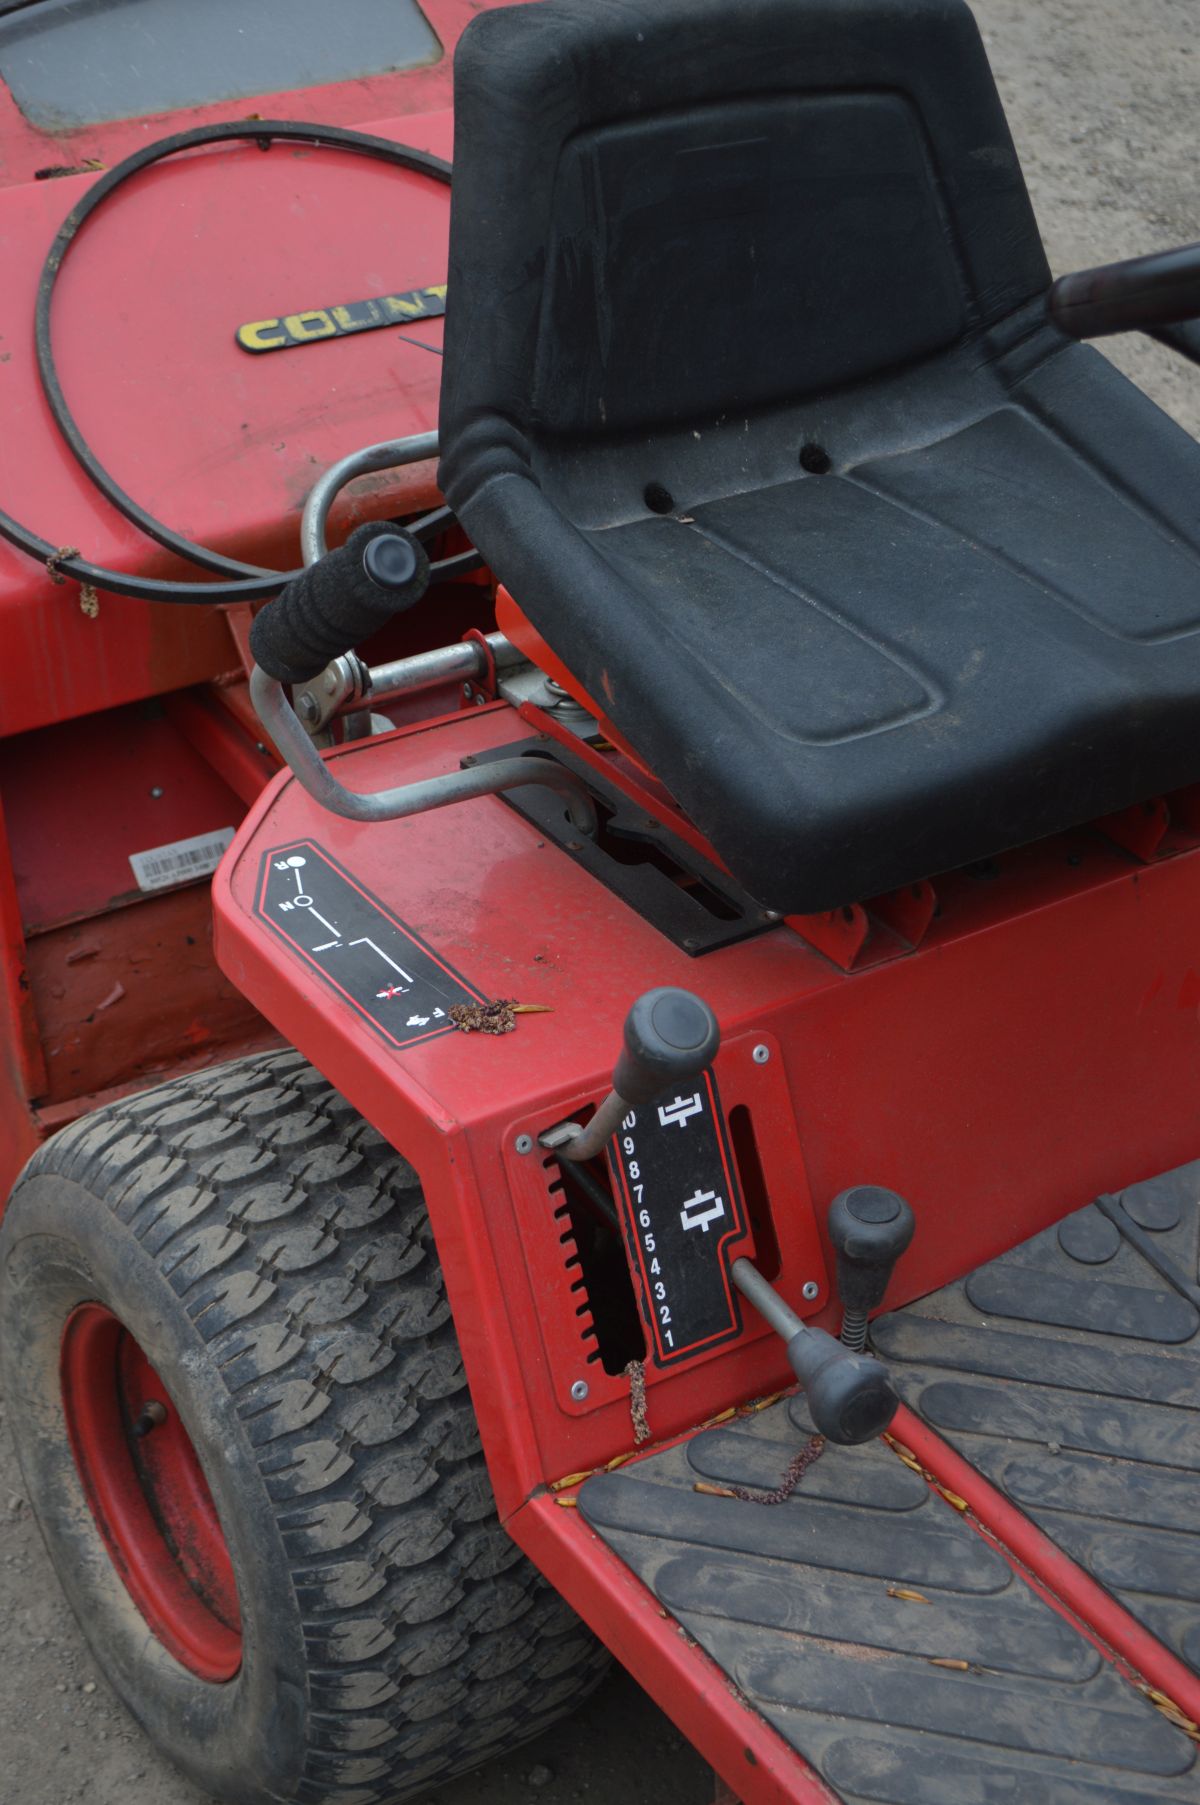 A COUNTAX HYDROSTATIC C600H RIDE ON LAWNMOWER, with a briggs and Stratton engine (key) - Image 7 of 7